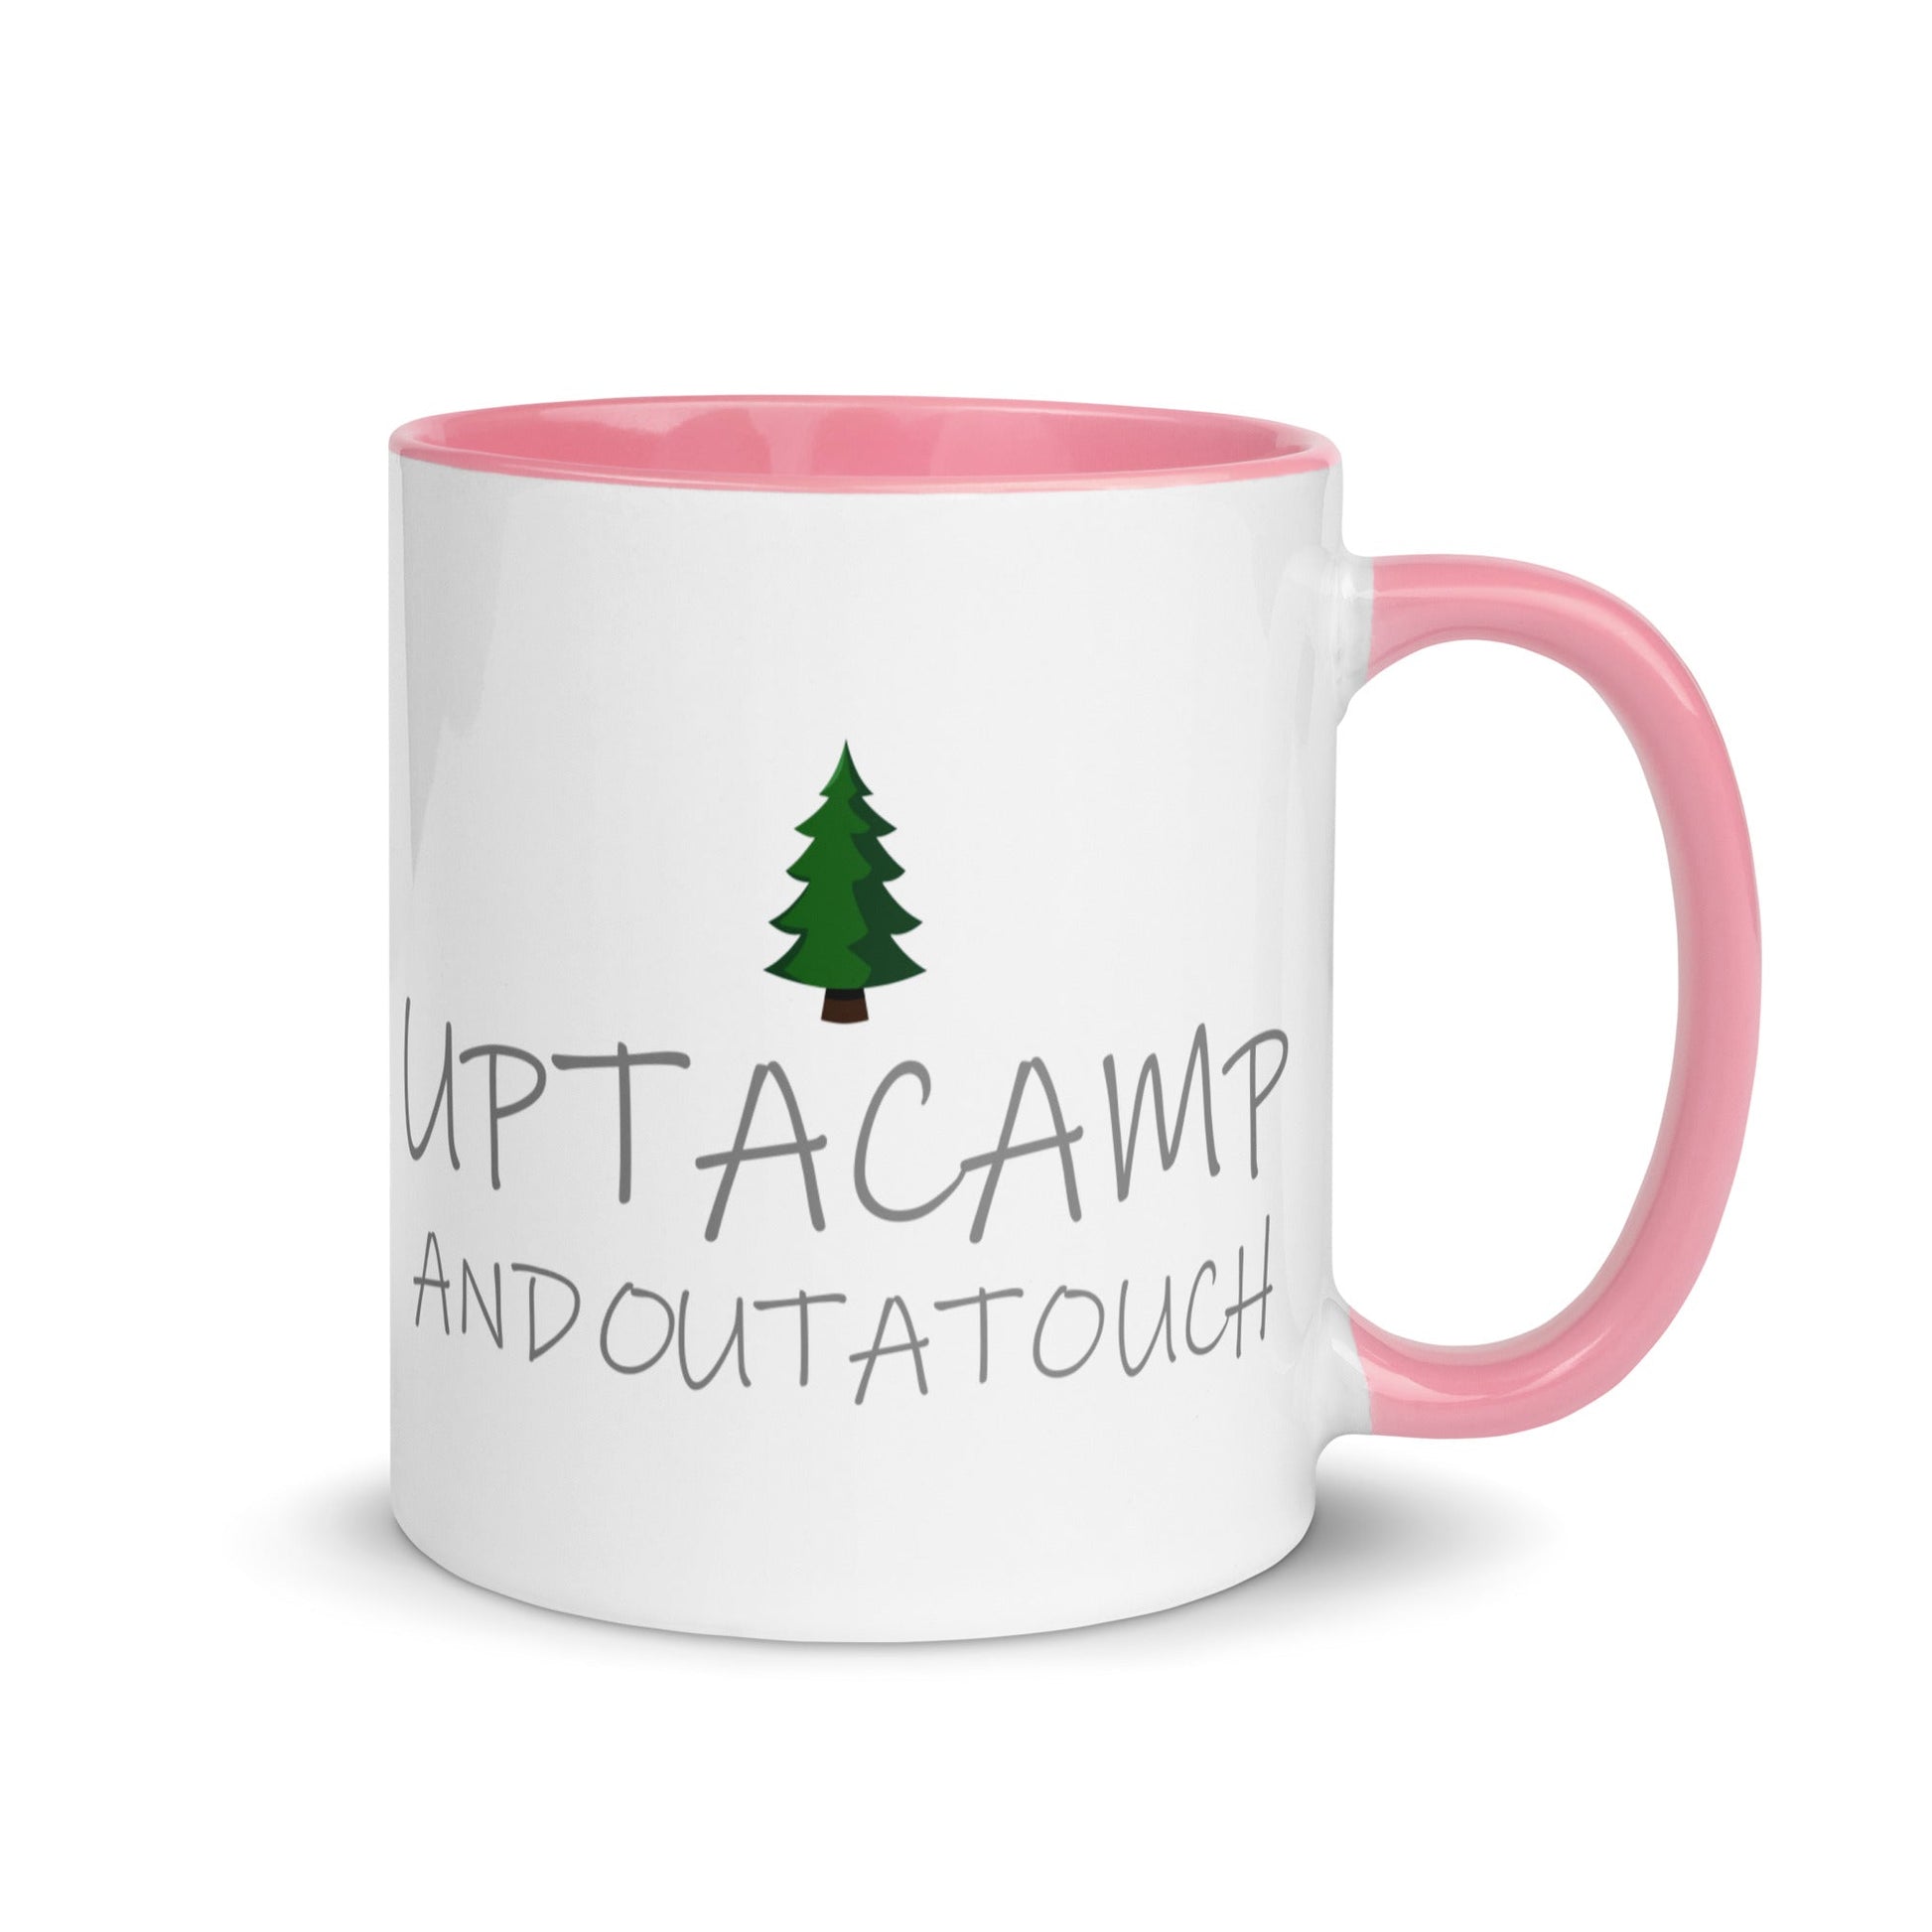 Upta Camp Outa Touch Mug with Color Inside